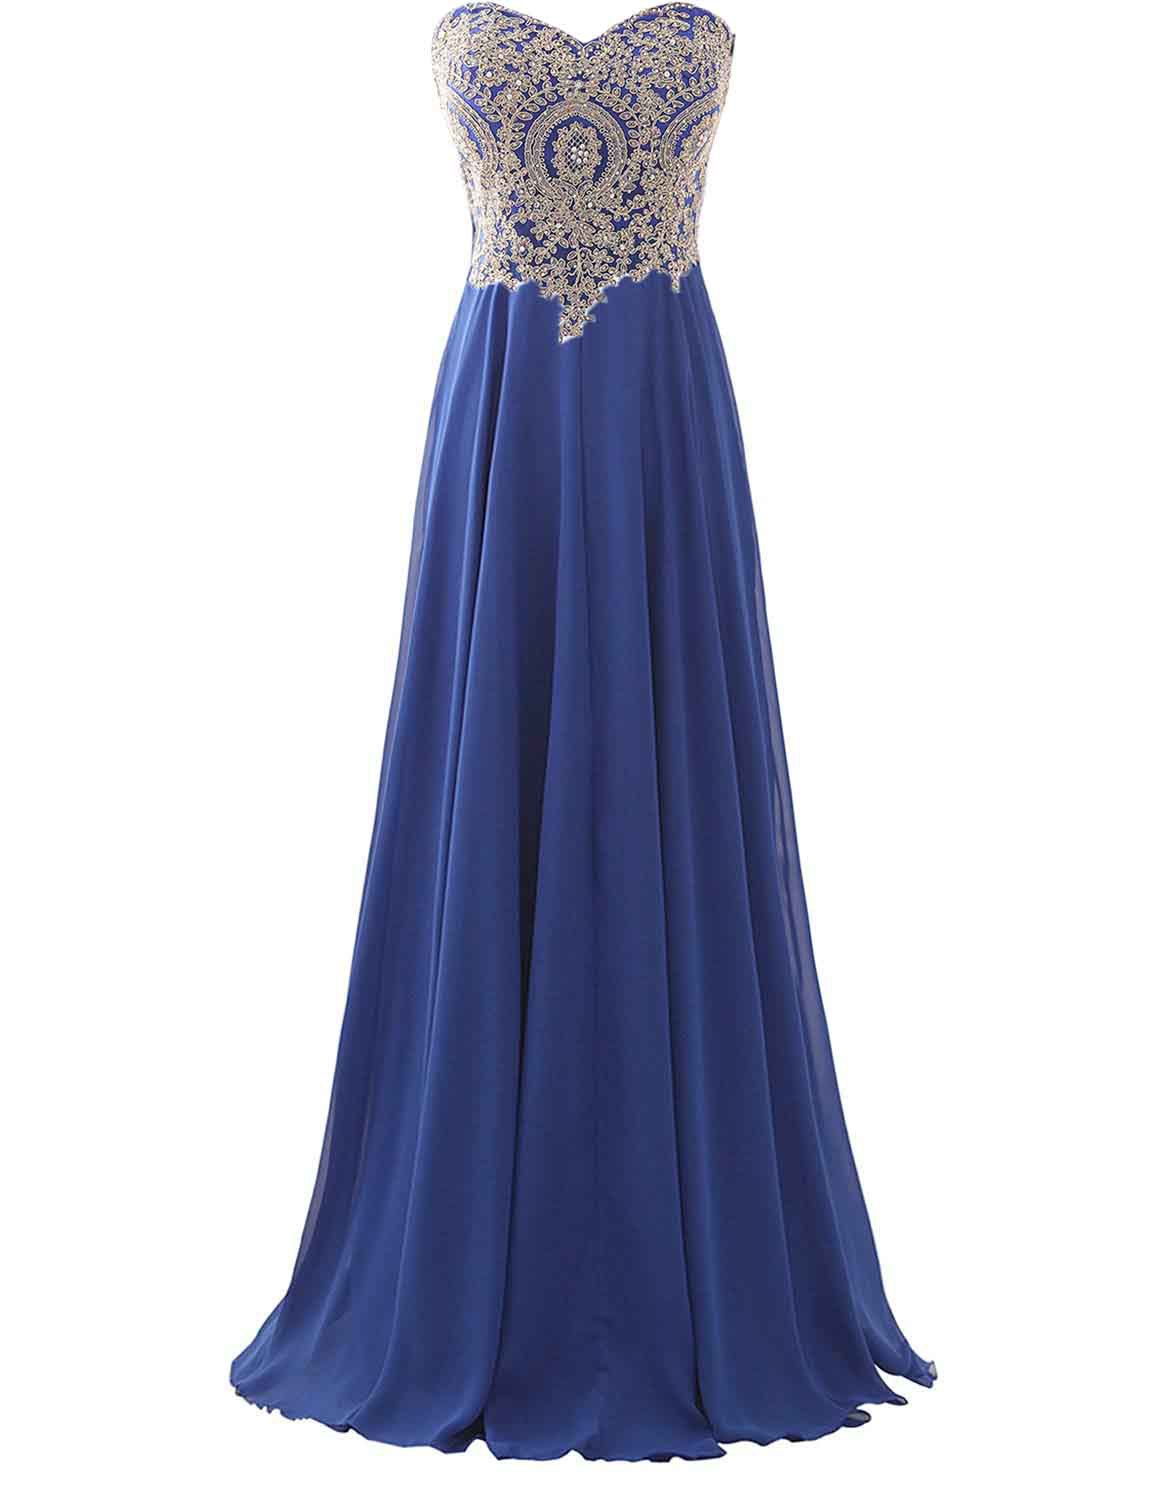 Off Shoulder Blue Chiffon Long Prom Dress With Lace Appliqued Prom Party Gowns , Sweet 16 Prom Gowns ,formal Evening Dress